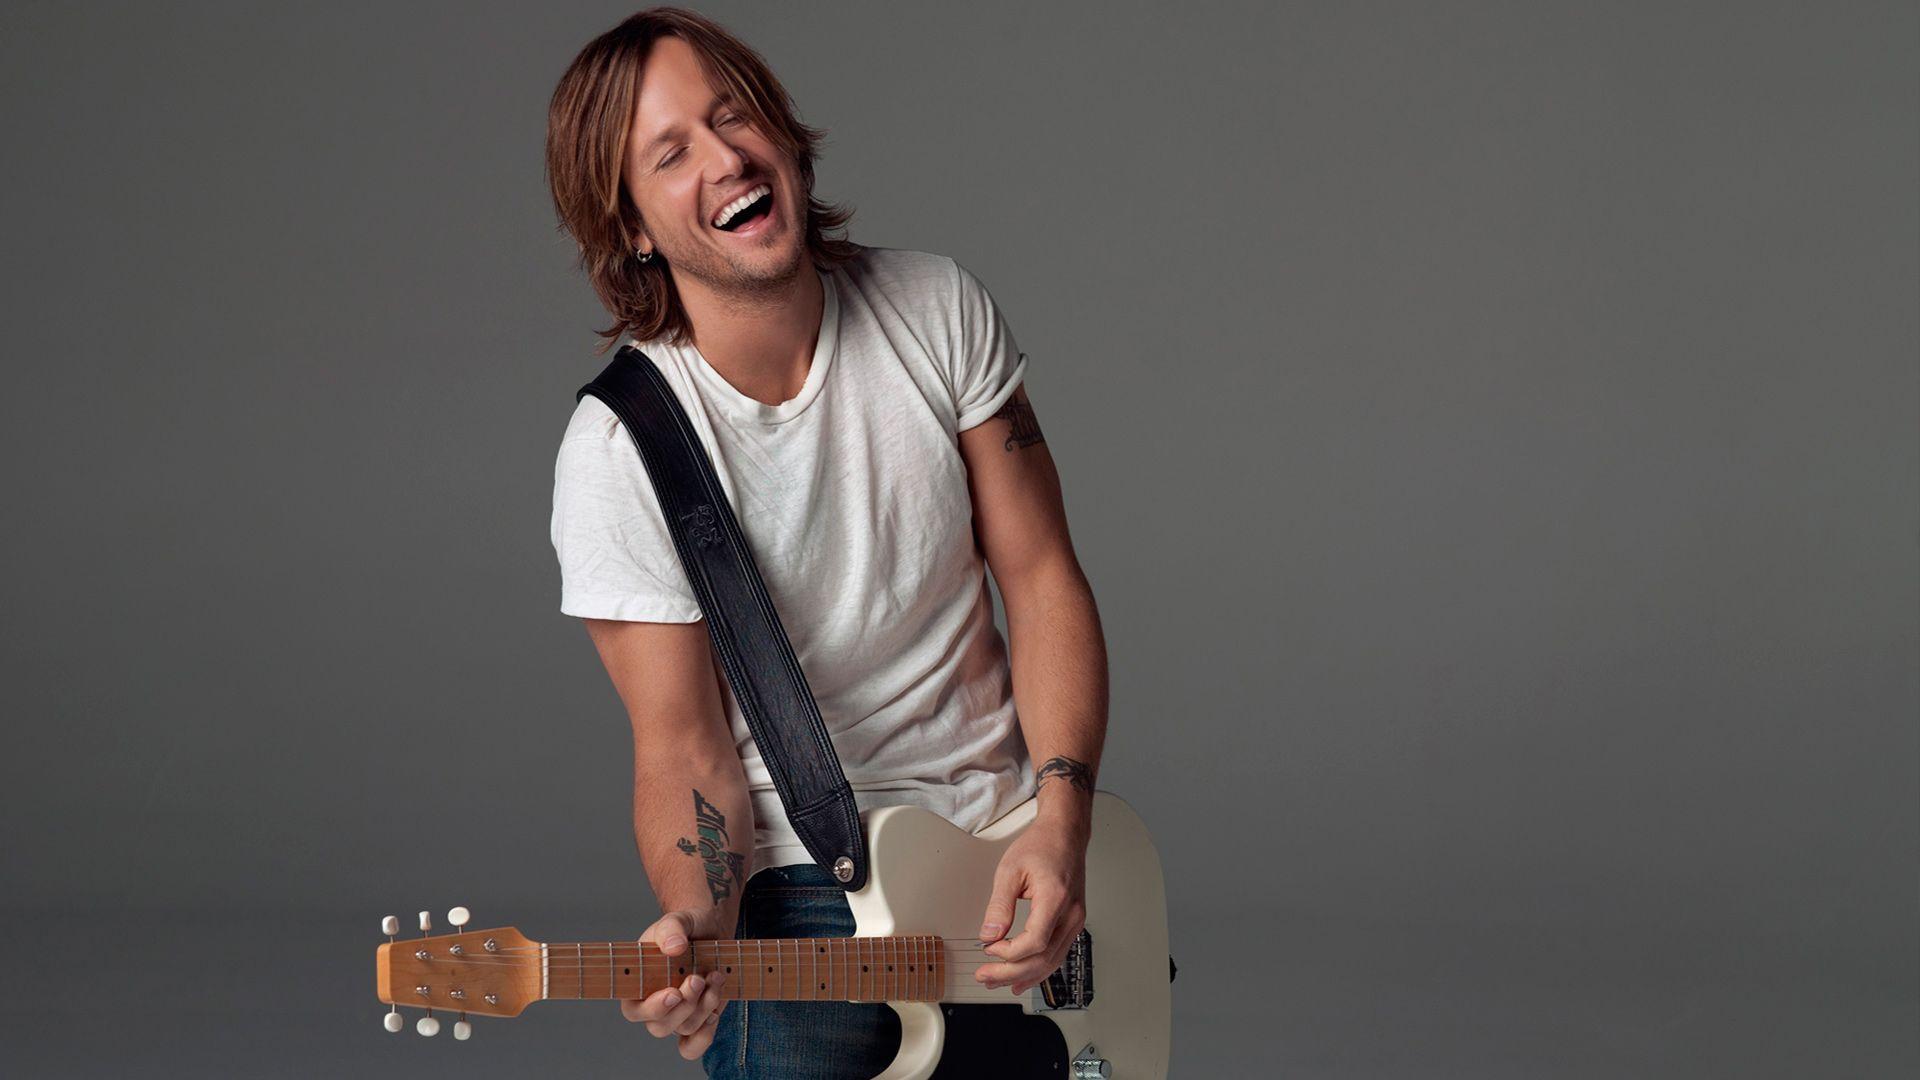 Keith urban wallpapers